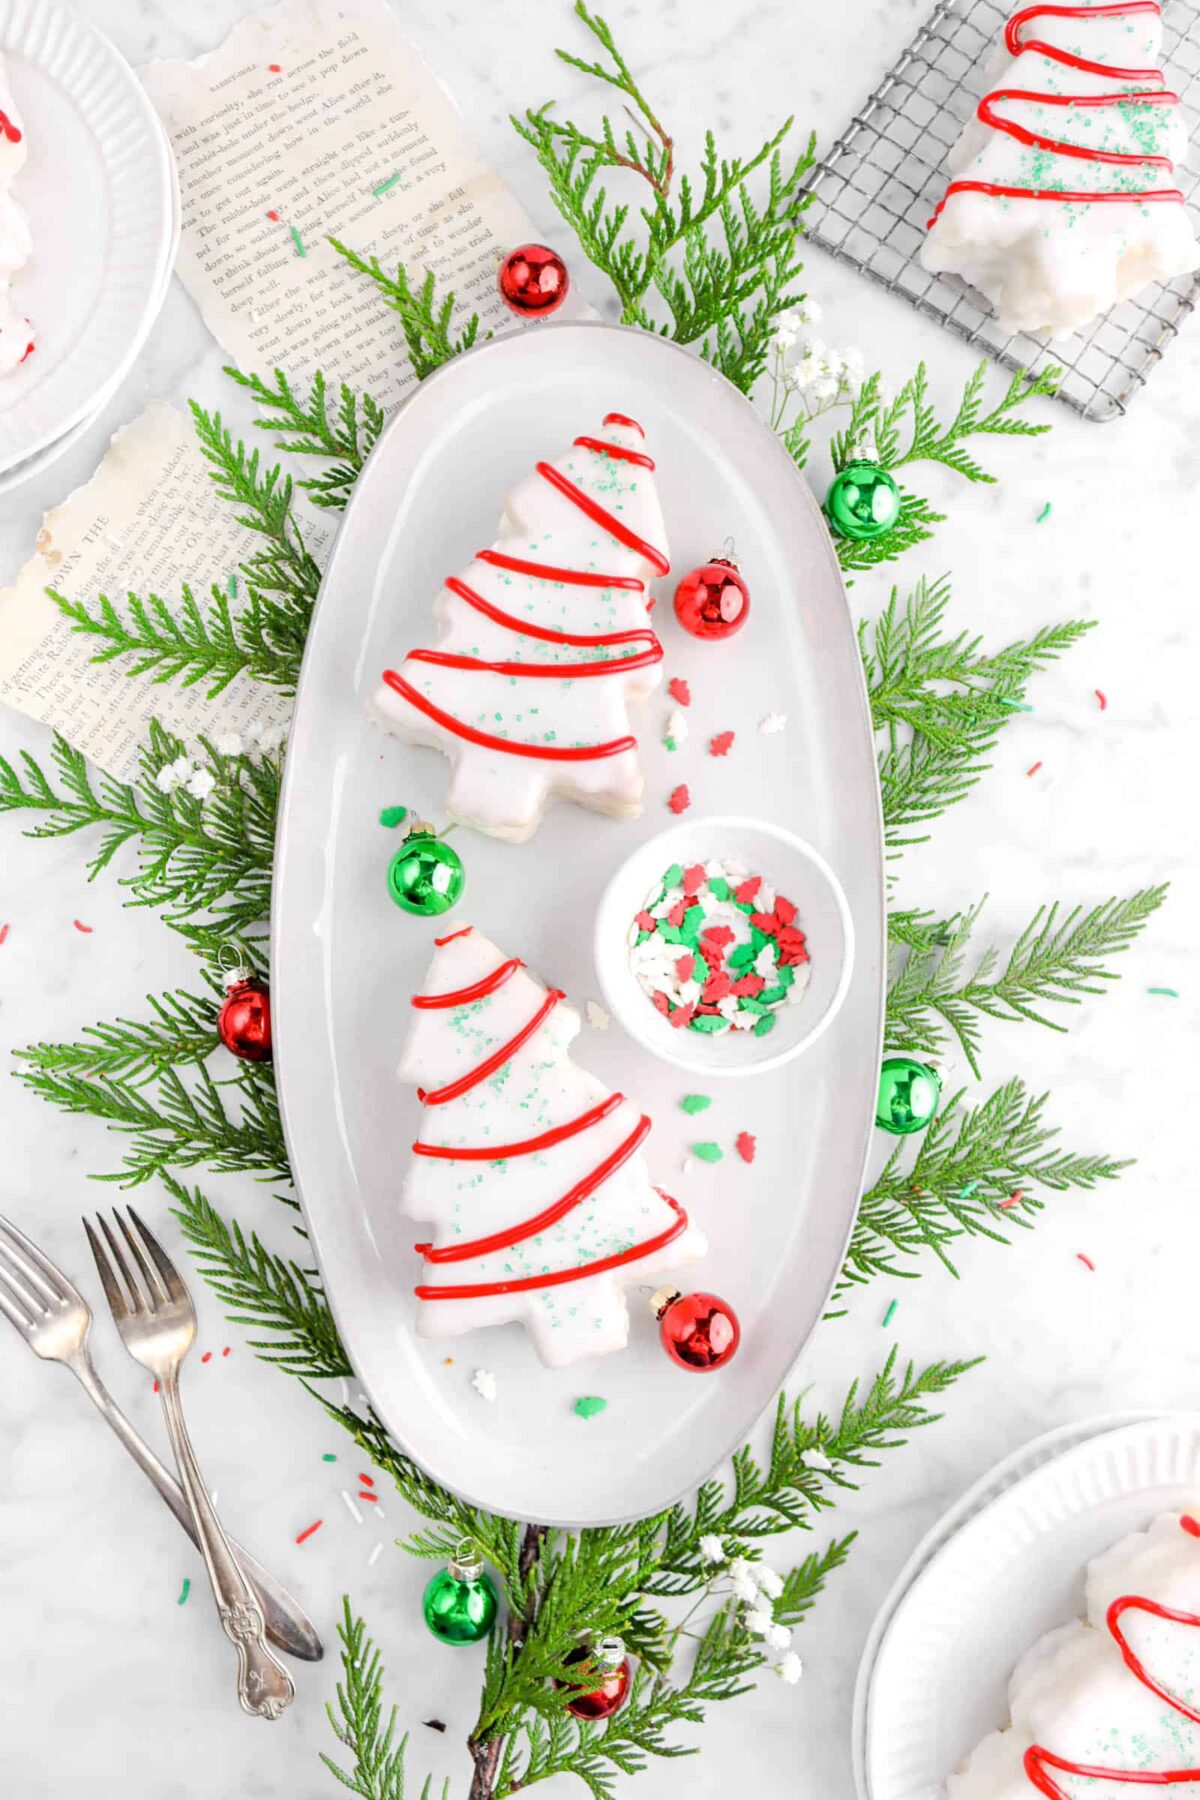 two christmas tree cakes on white plate with greenery underneath, two forks, three christmas cakes around, two book pages underneath plate, and mini red and green ornments around